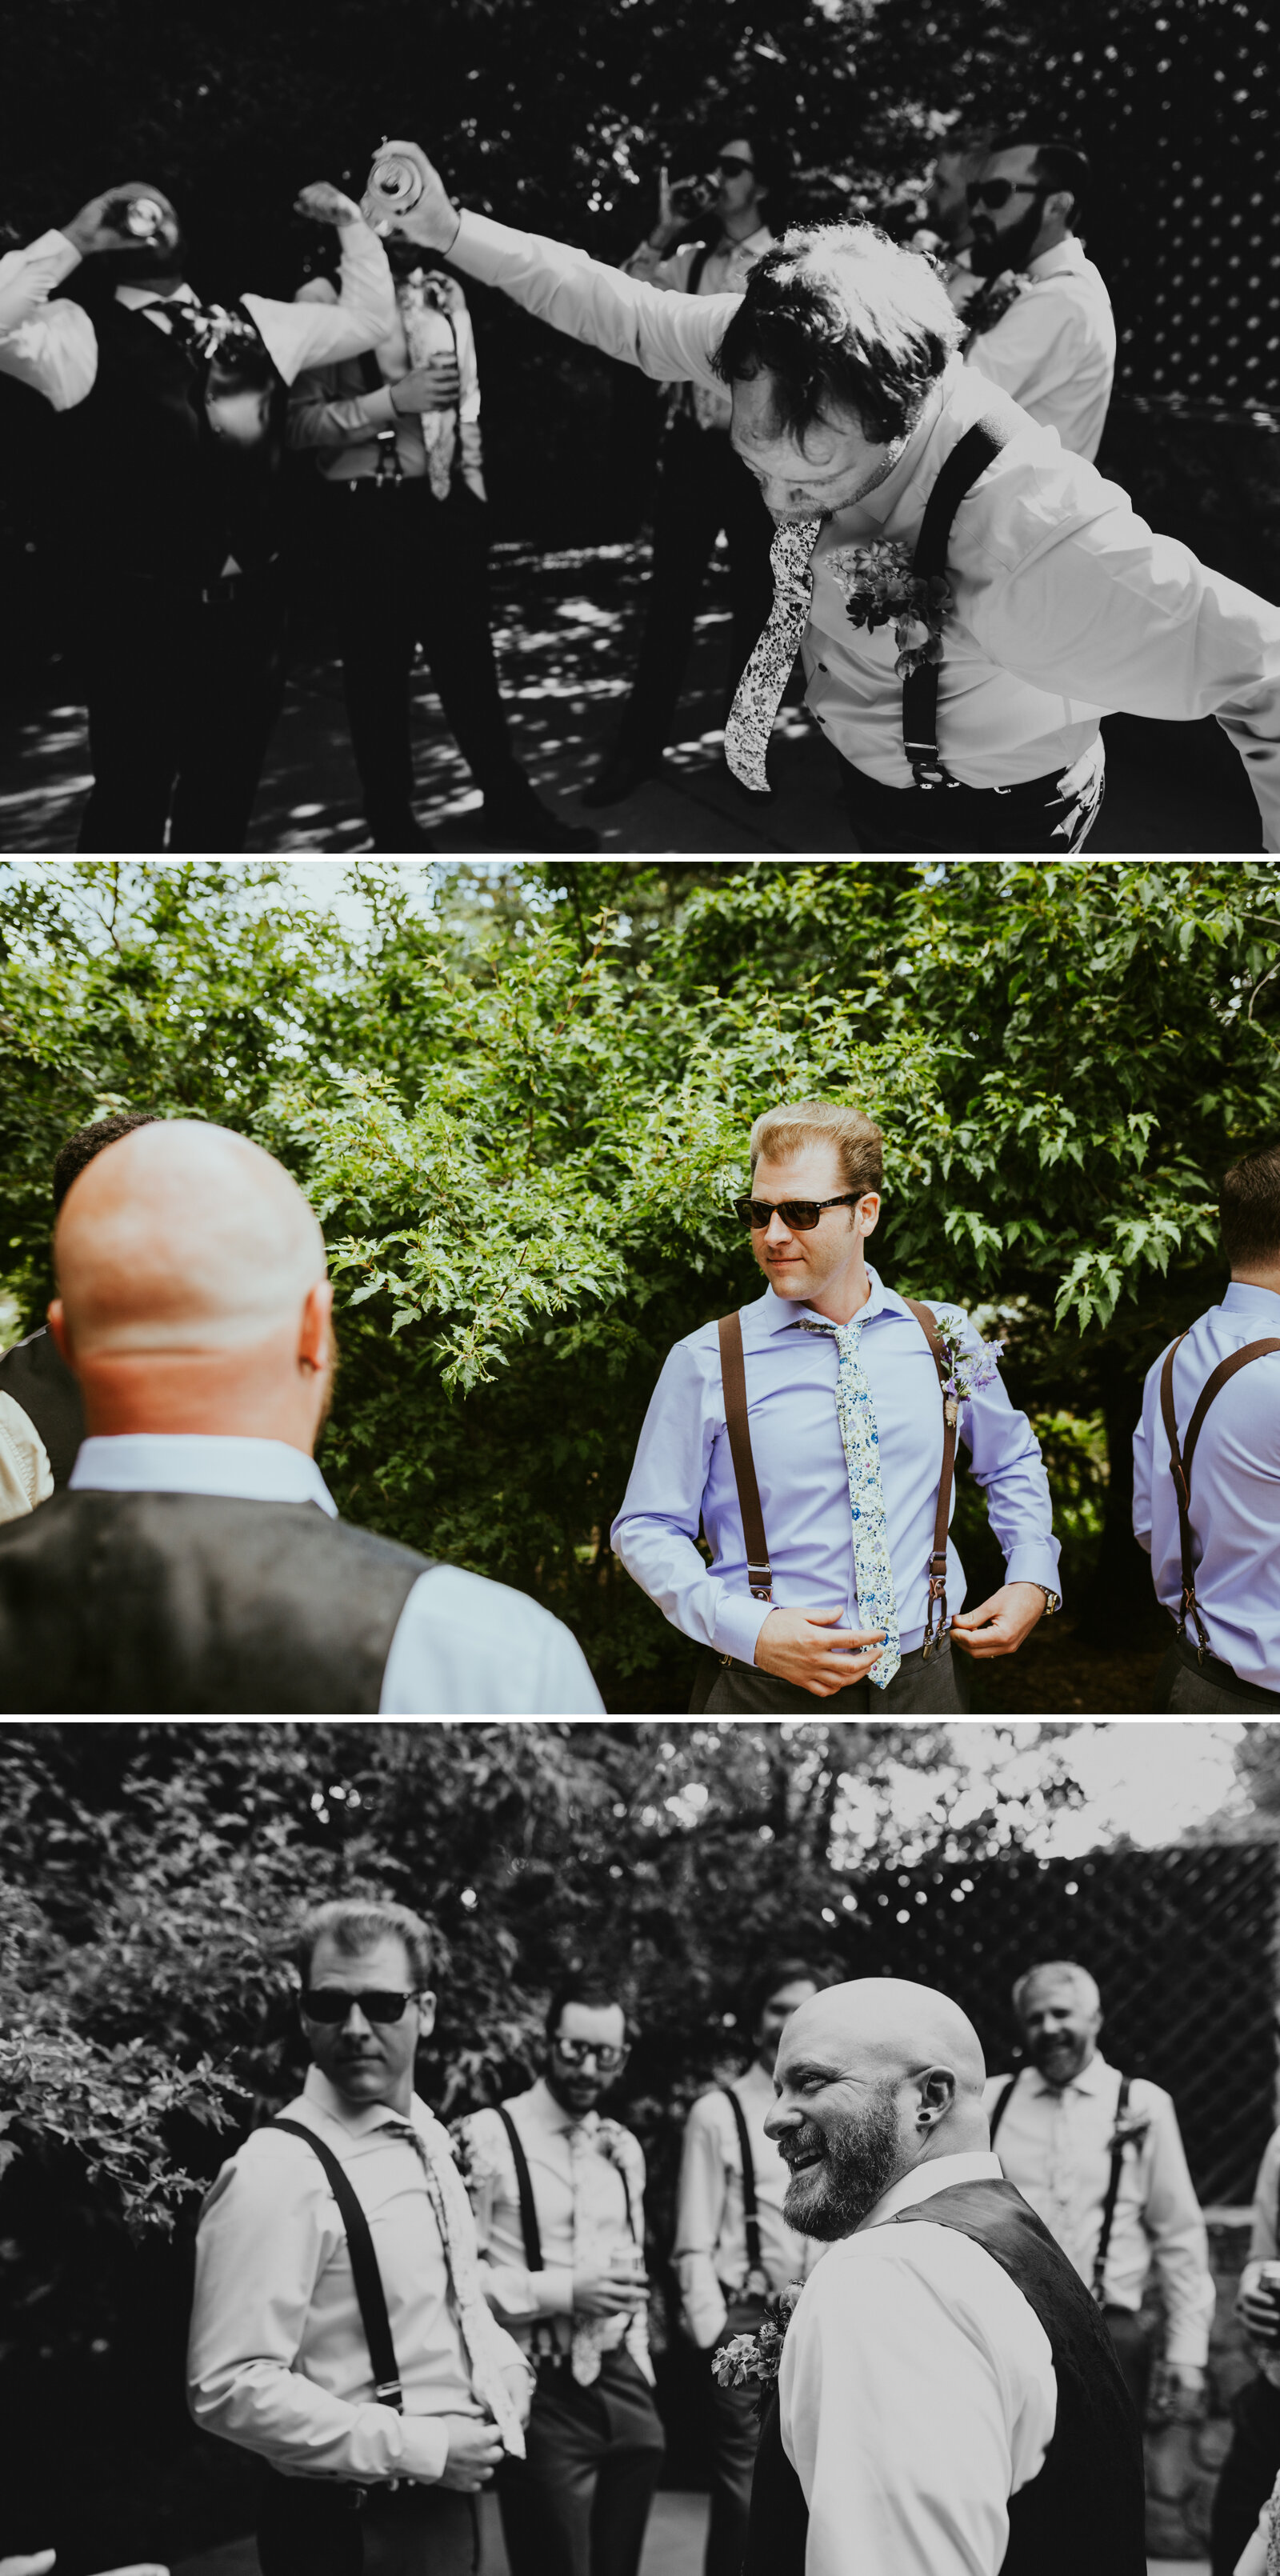 groomsmen hanging out before the wedding drinking beers and laughing.jpg